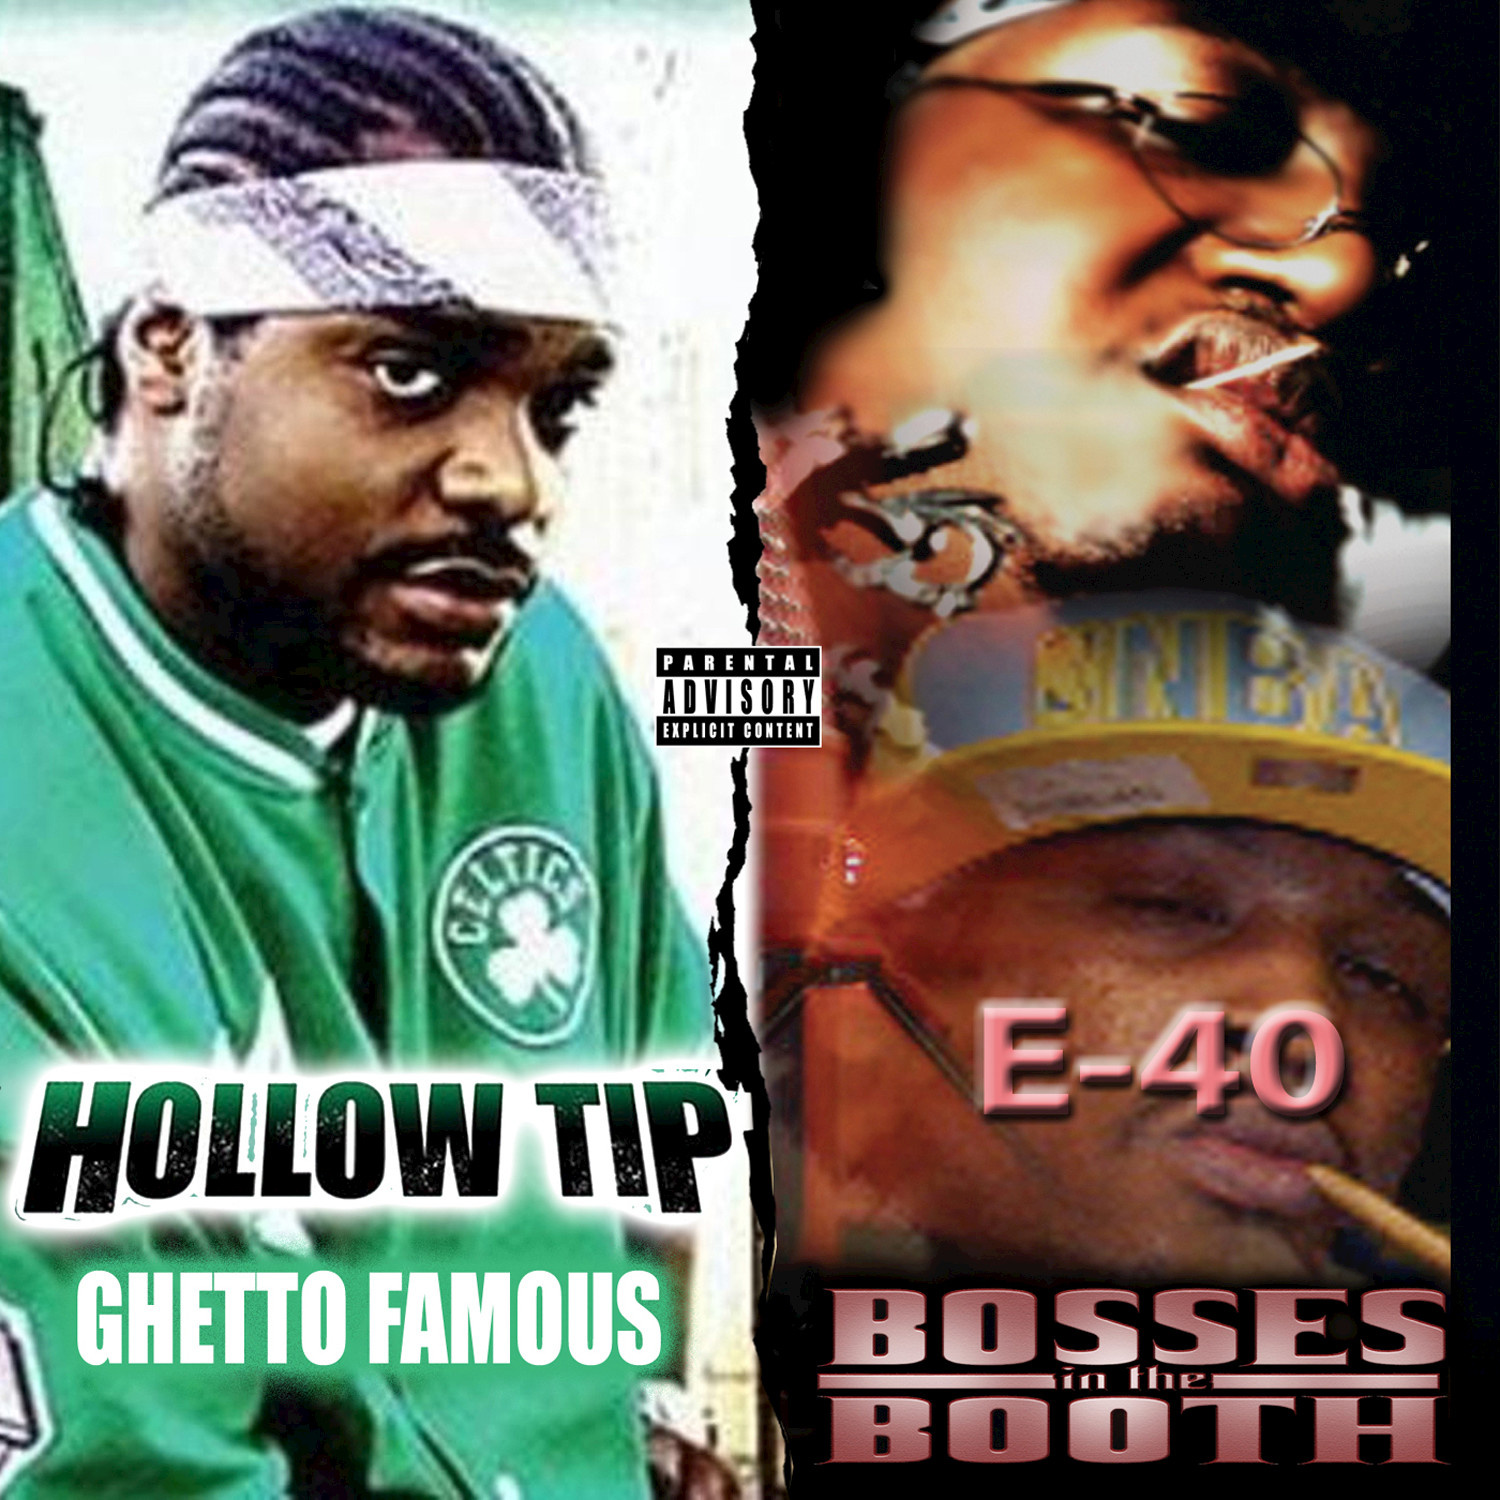 Bosses in the Booth & Ghetto Famous (Deluxe Edition)